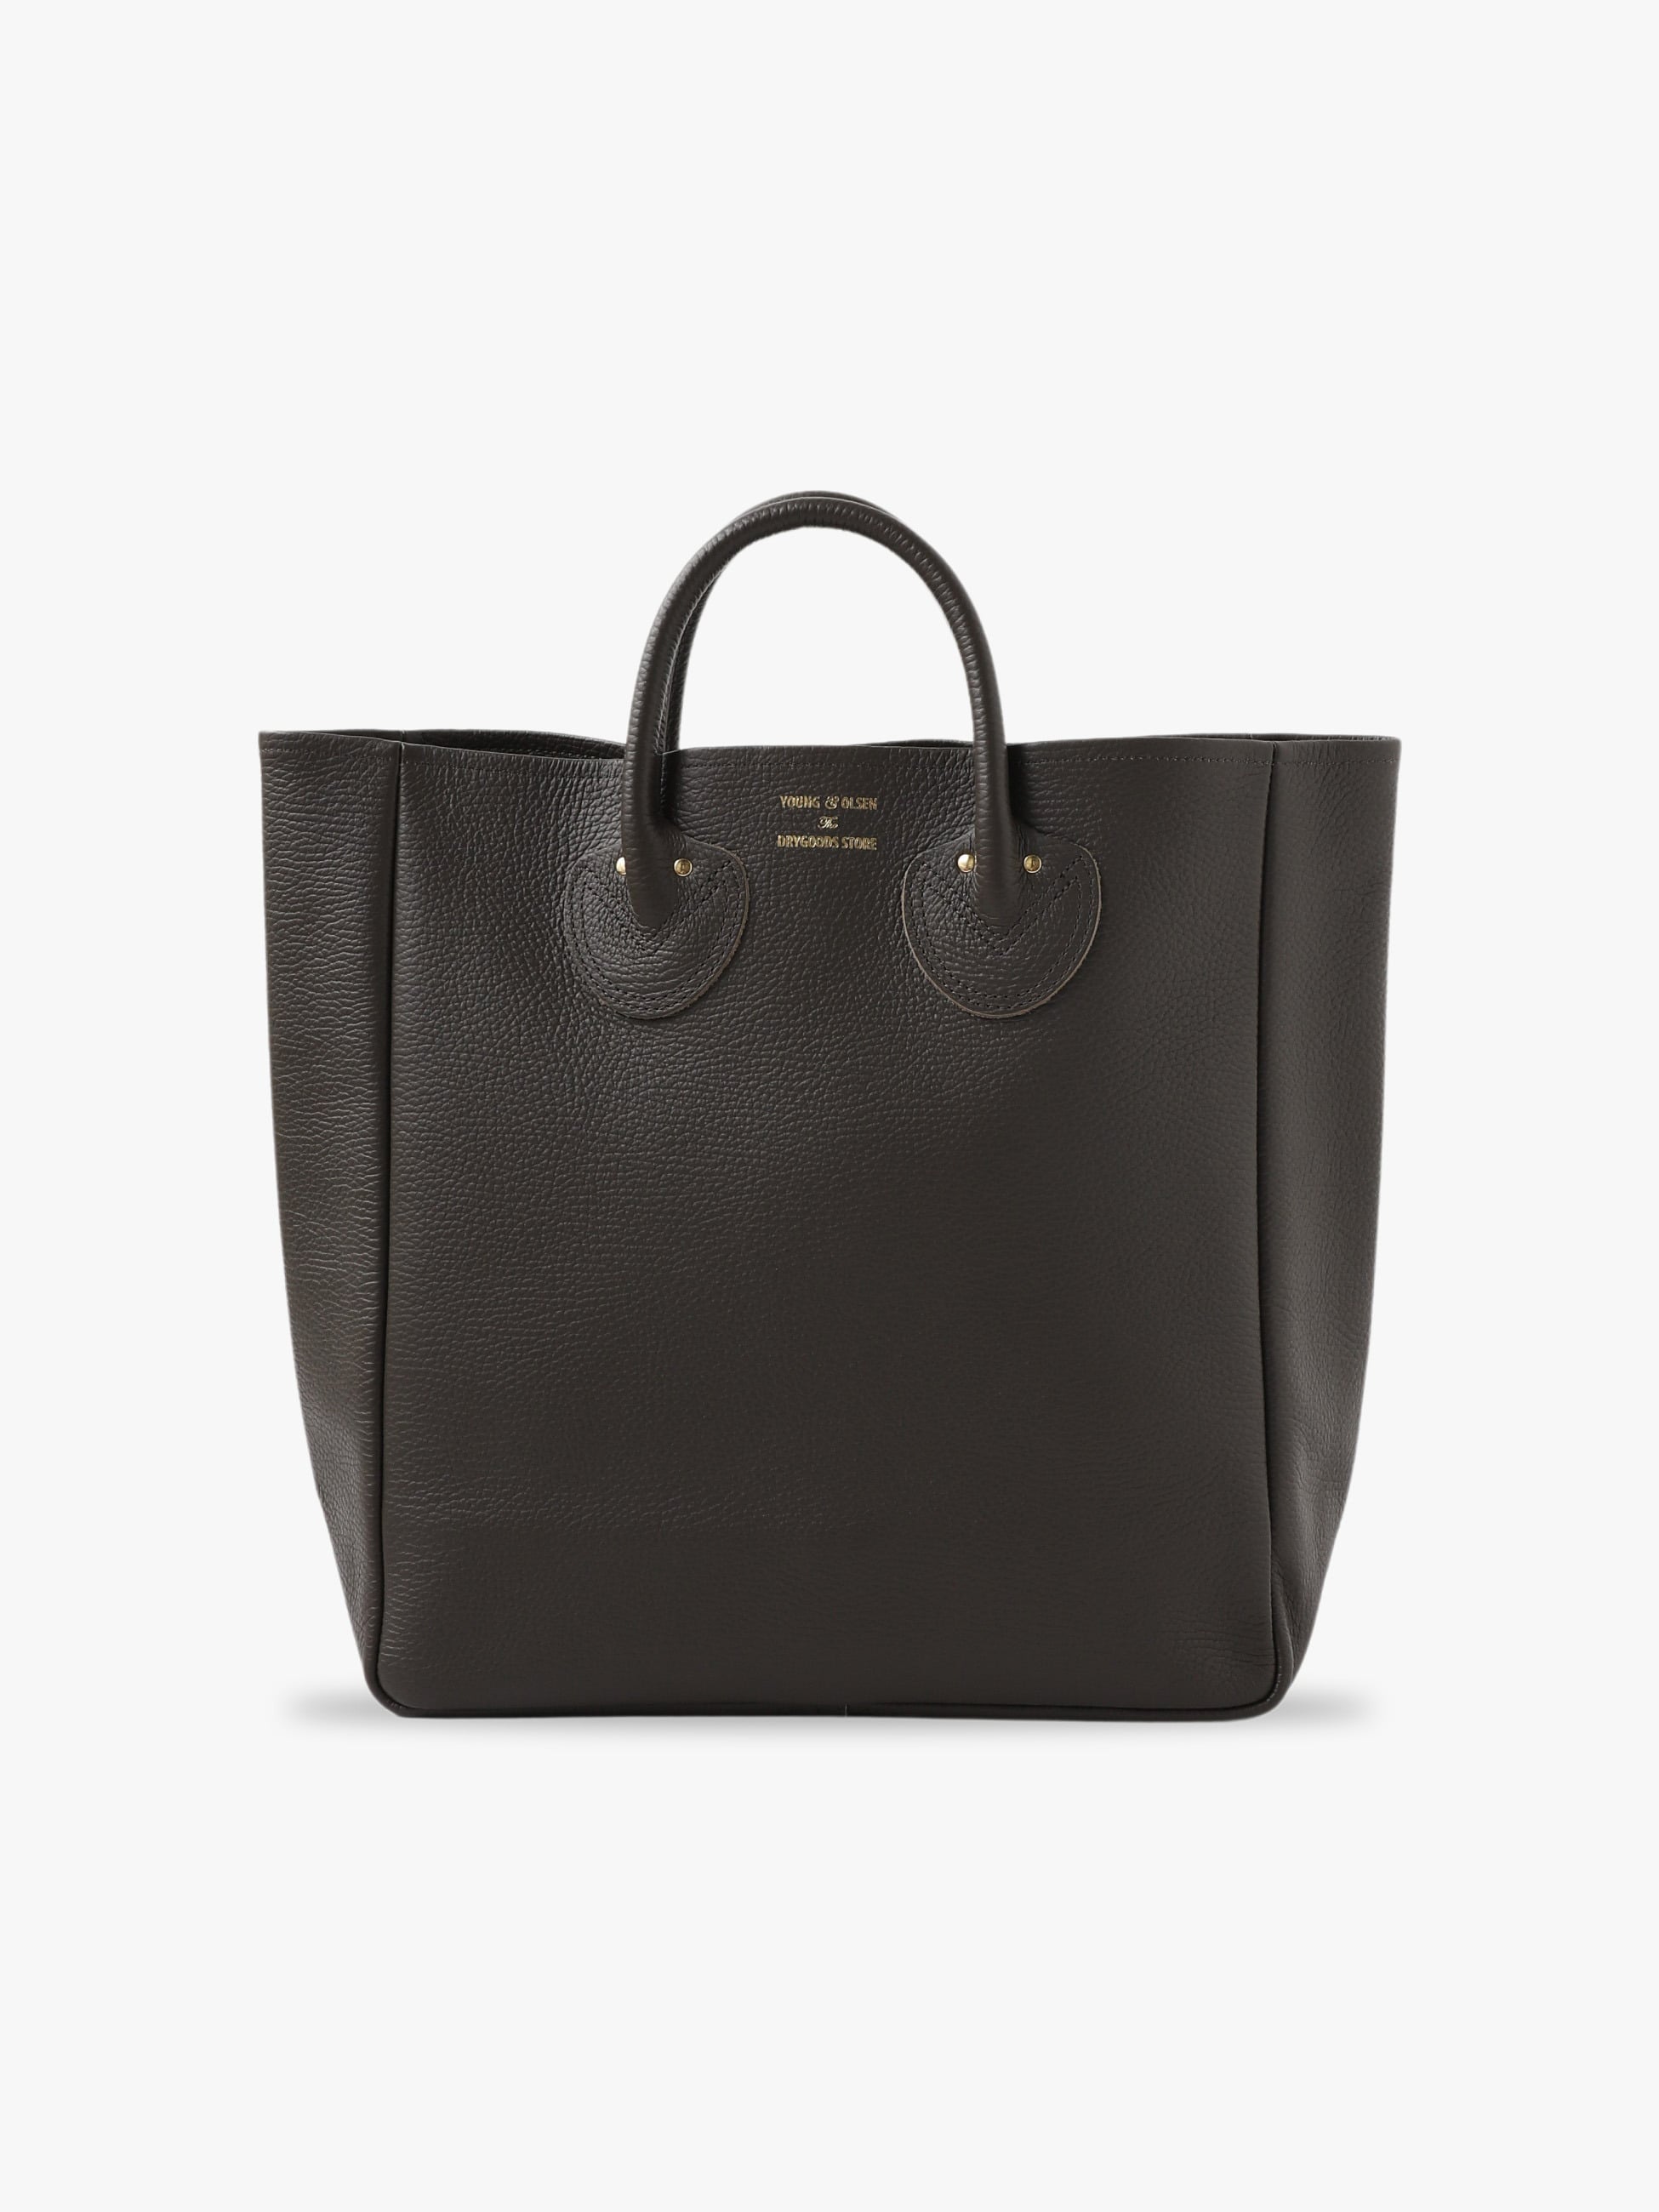 Embossed Leather Tote Bag (M)｜YOUNG & OLSEN the DRYGOODS STORE